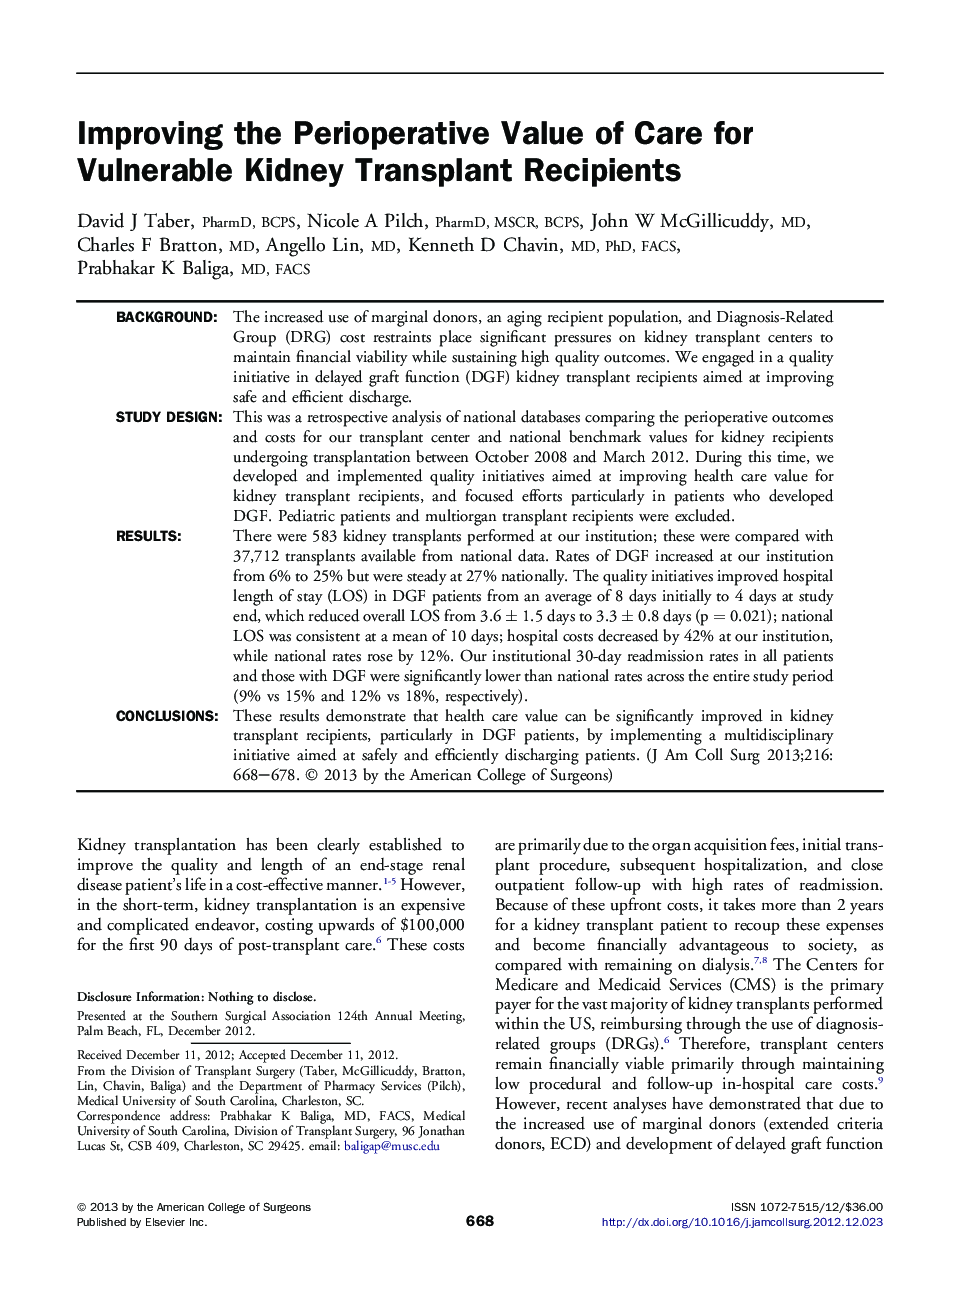 Improving the Perioperative Value of Care for Vulnerable Kidney Transplant Recipients 